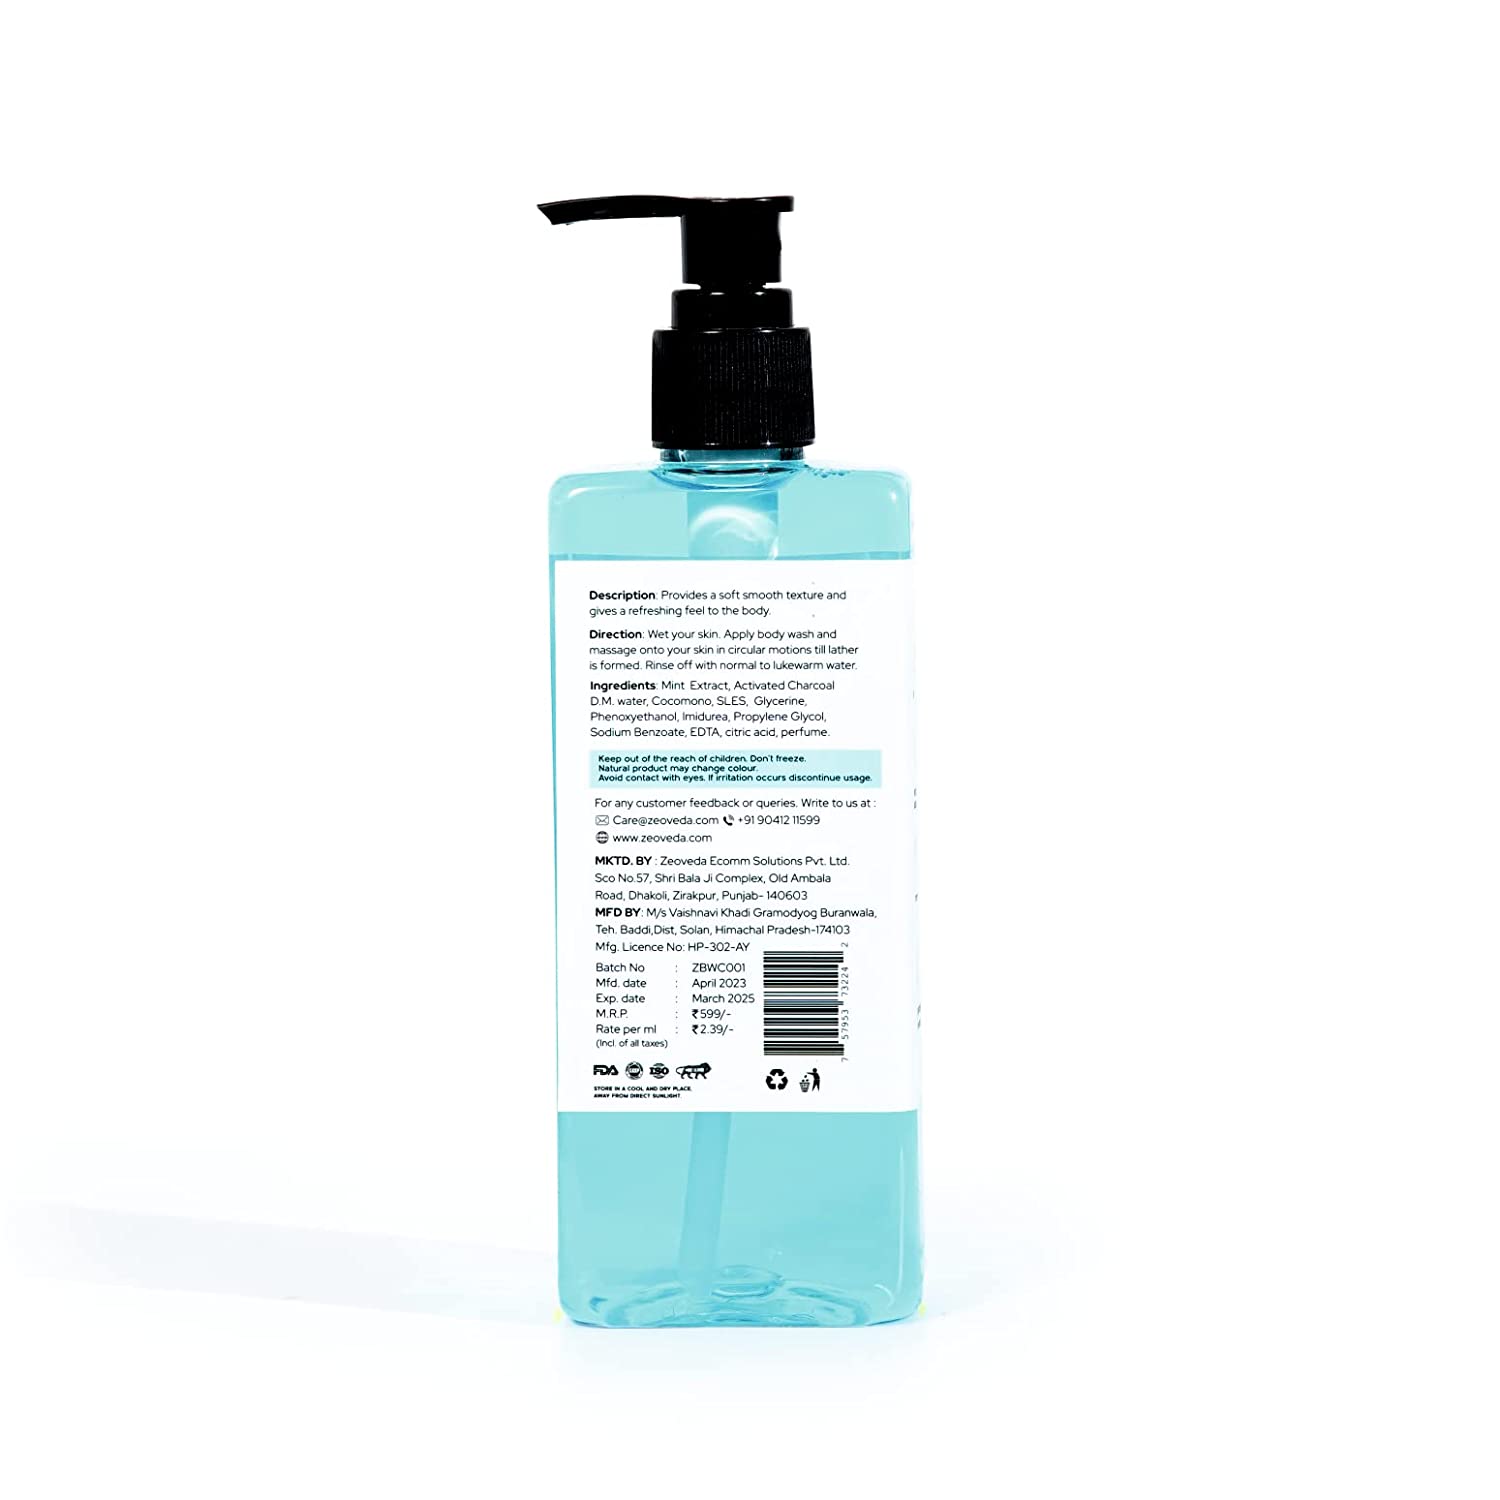 Blue Lagoon Perfumed Body Wash With Mint Extract | Energizing & Revitalising Shower Gel (250 ML)